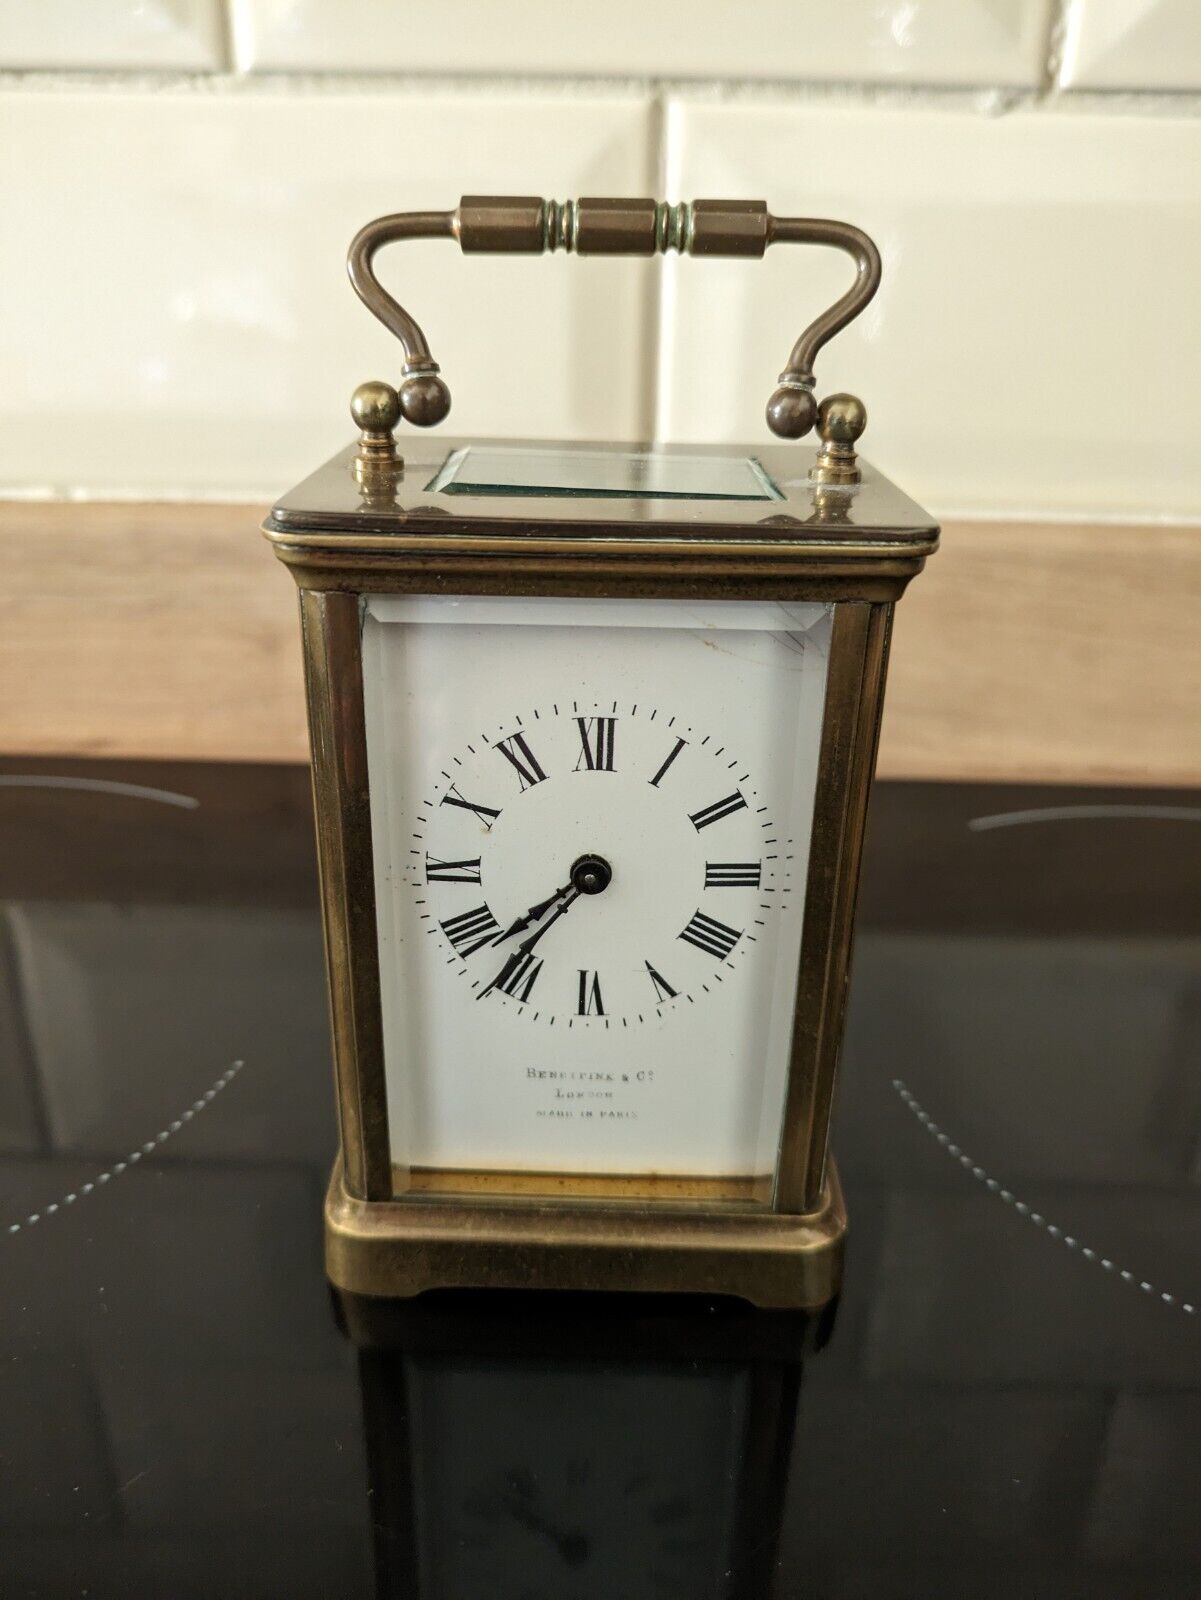 Vintage Brass Carriage Clock Benetfink & Co London, Made in Paris Working 